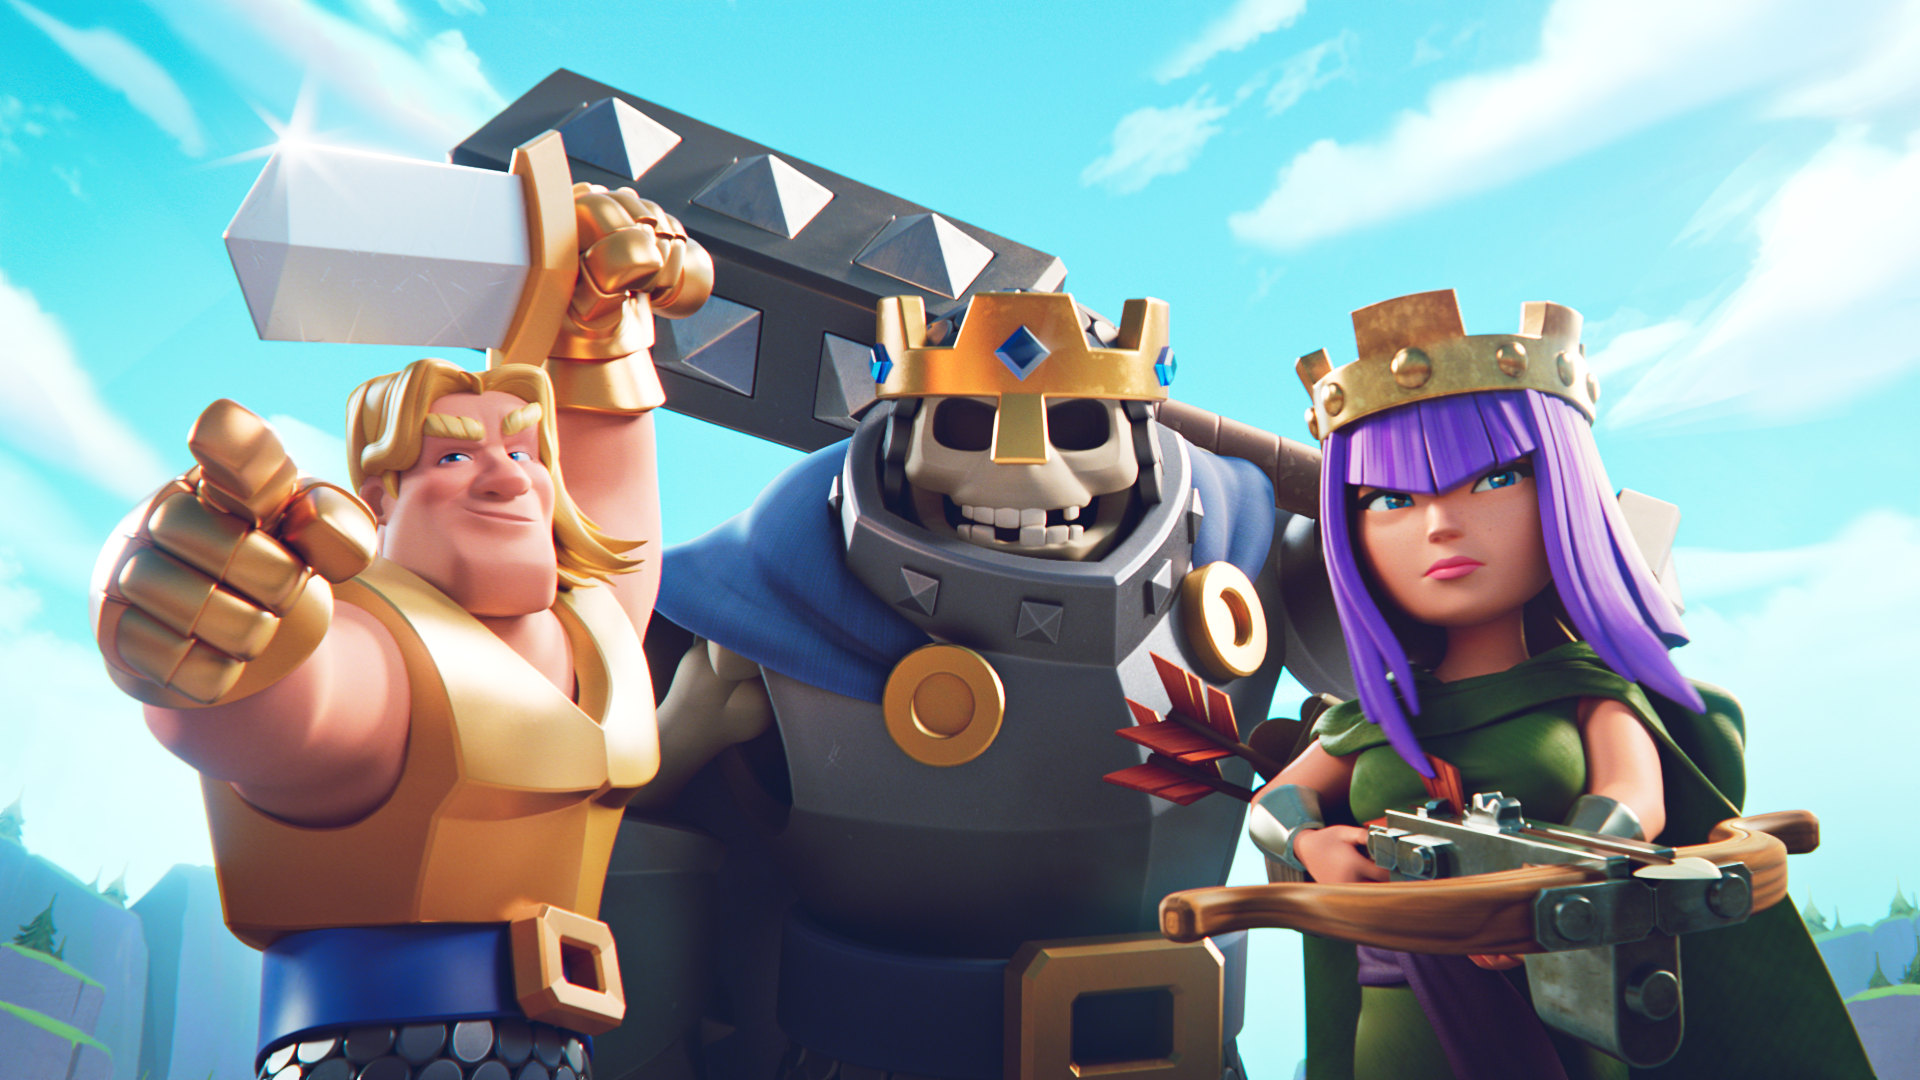 SUPERCELL AND SQUEEZE ARE BACK, INTRODUCING THE NEW CLASH ROYALE  'CHAMPIONS